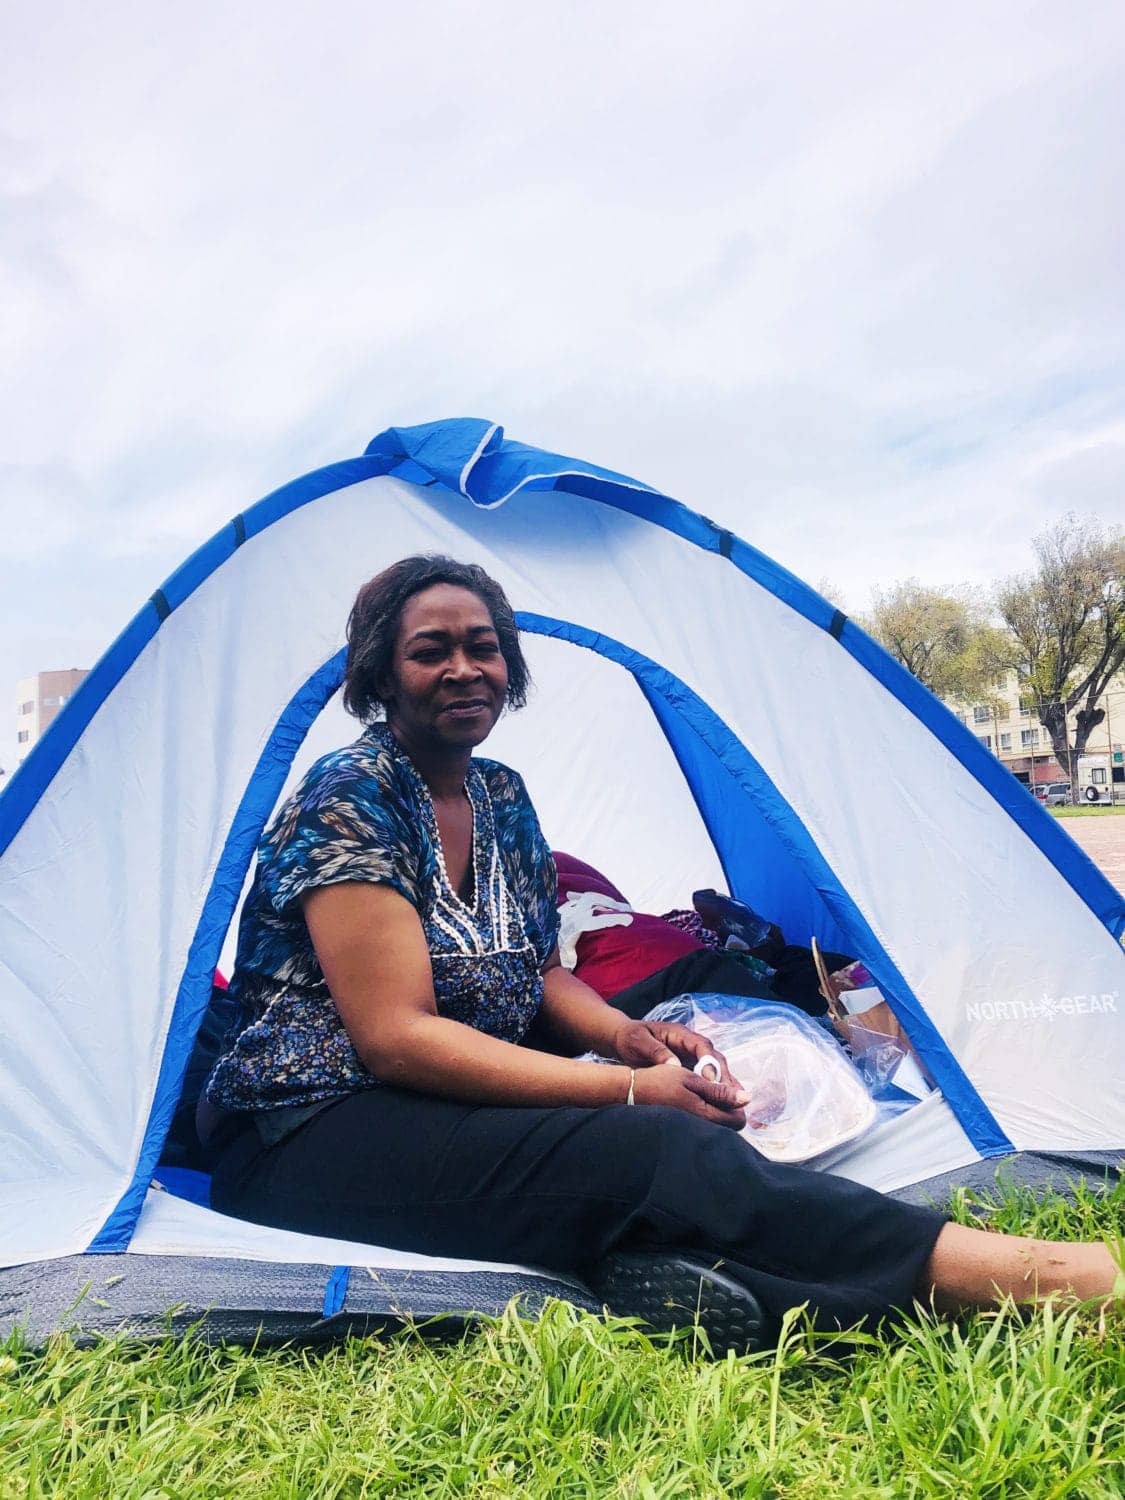 Beds-4-Bayview-MLK-Park-resident-Darnice, Community seizes MLK Park as immediate COVID relief for unhoused neighbors, Local News & Views 